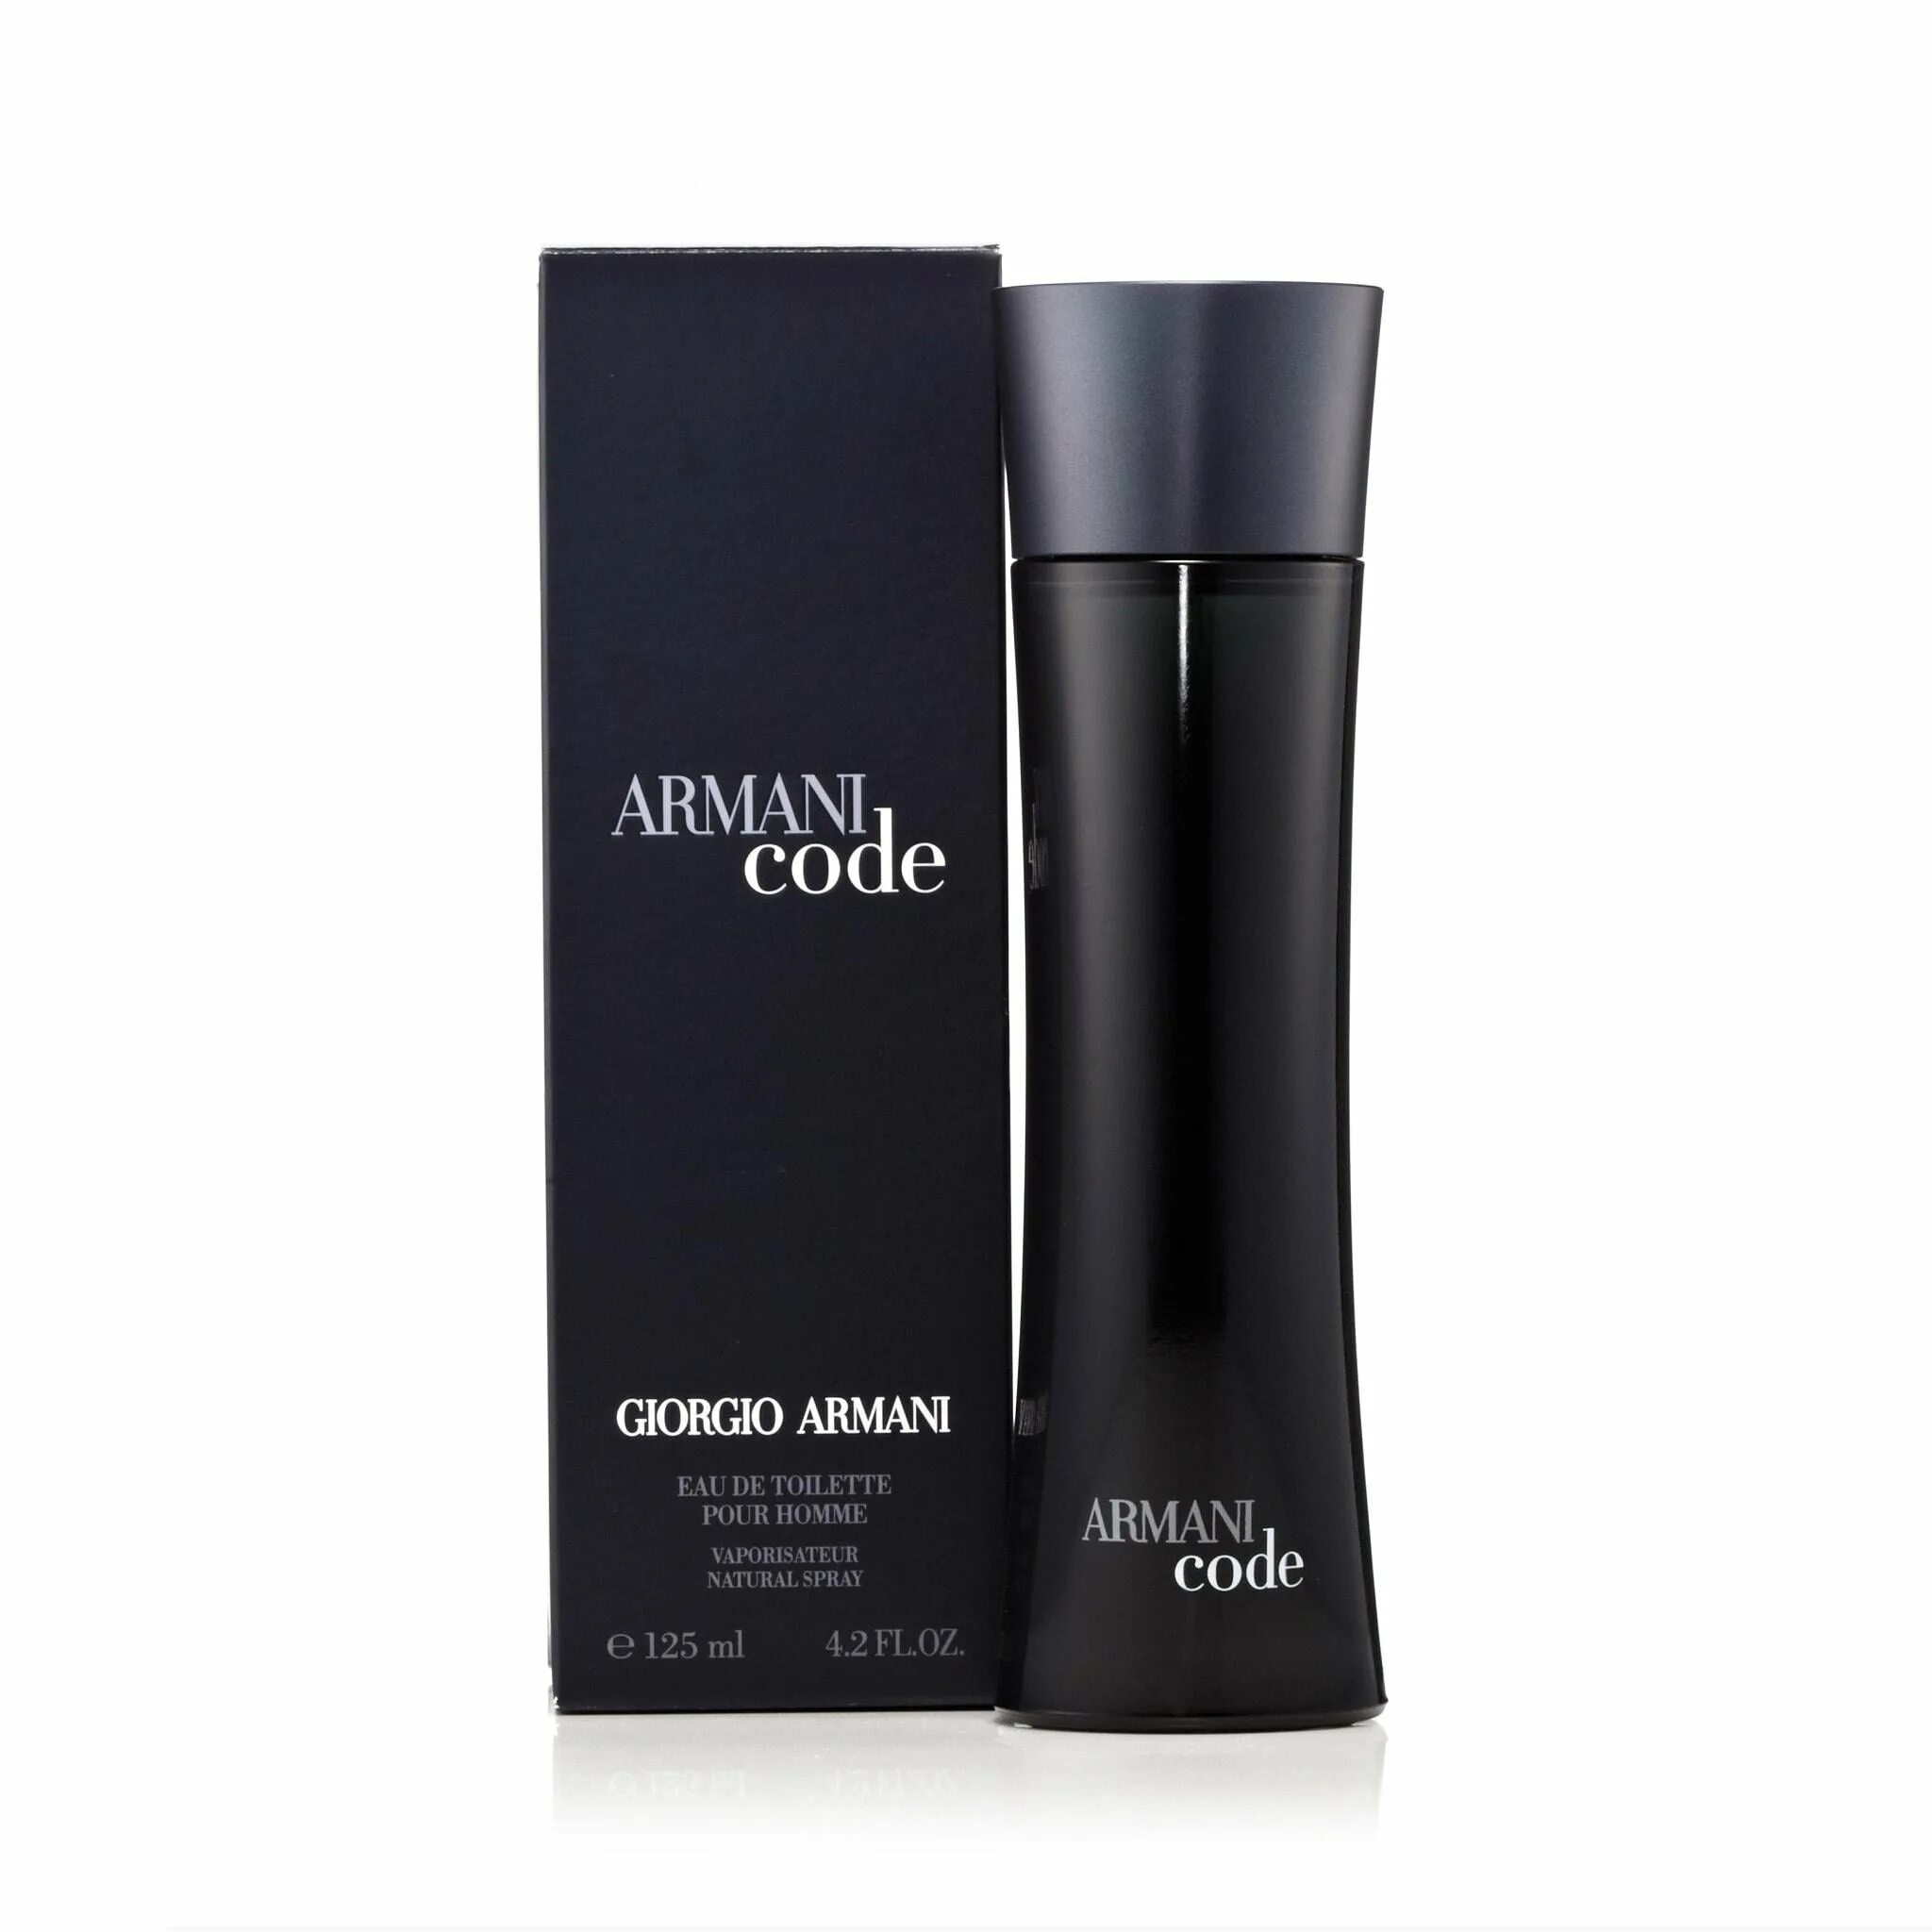 Giorgio Armani Armani code. Giorgio Armani Armani code Parfum, 100 ml. Giorgio Armani "Armani code Parfum" 125 ml. Armani code Black for men. Armani code pour homme